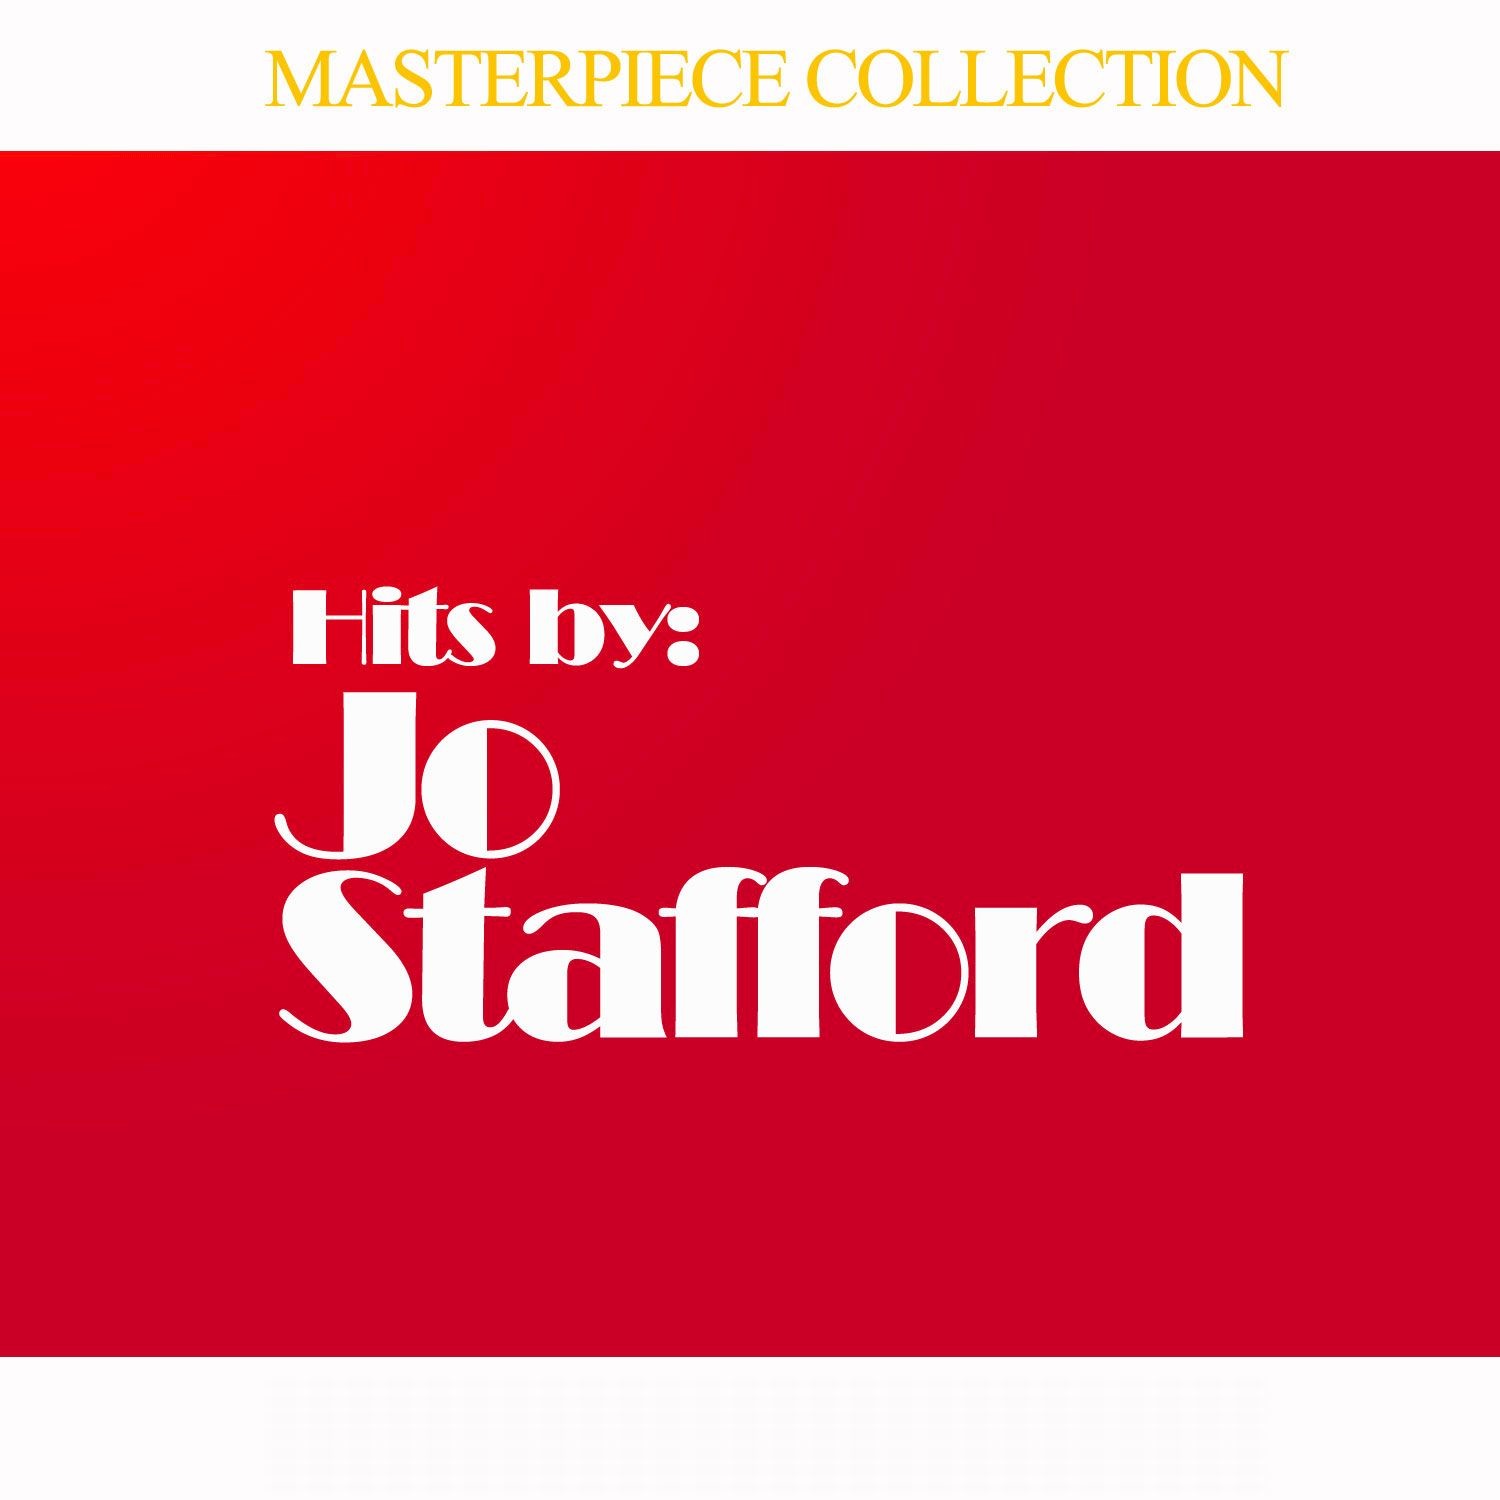 Masterpiece Collection of Jo Stafford